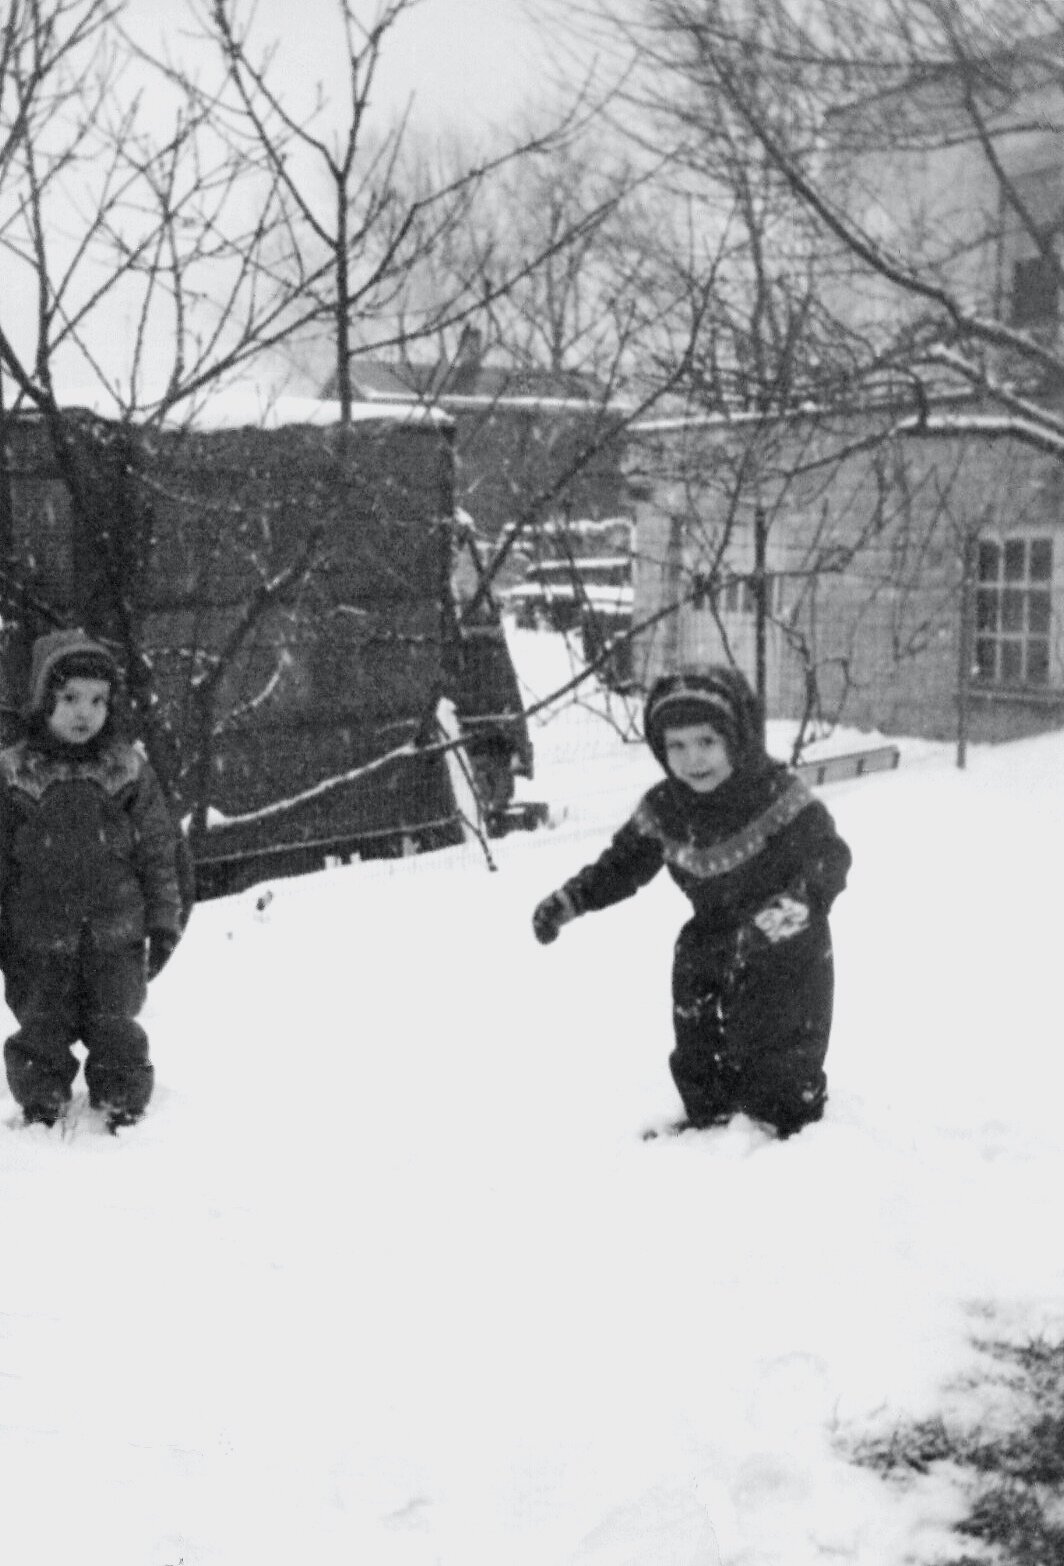  Diane and Linda Vicarel, playing in the snow near the Christmas tree lot, c. 1956 